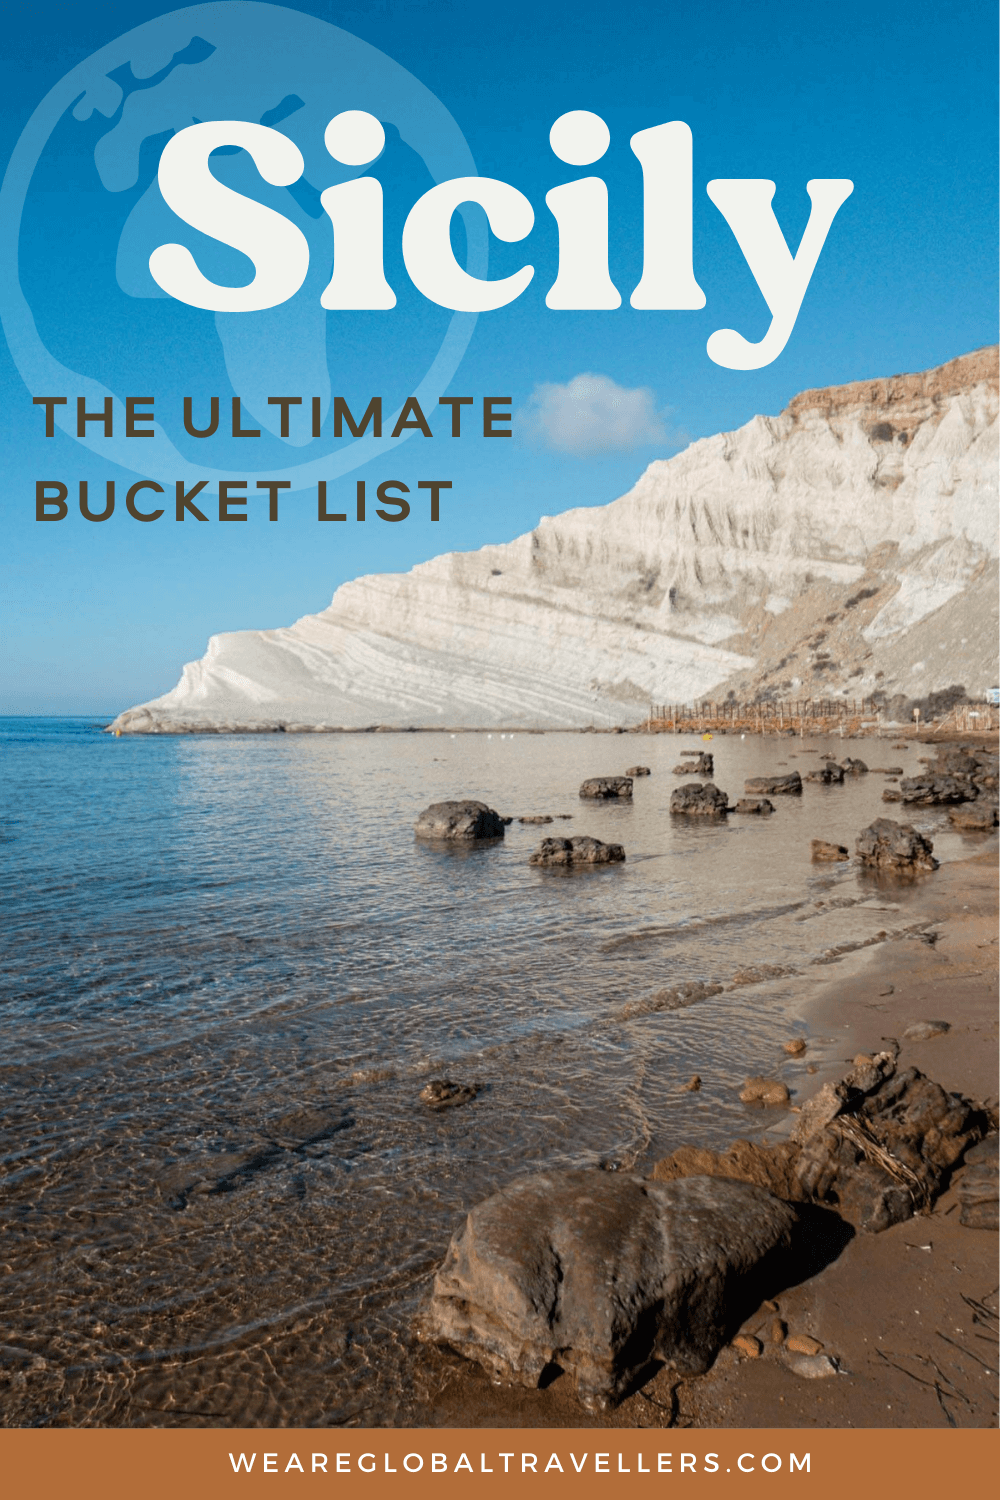 A Sicily bucket list: 20 of the best things to do